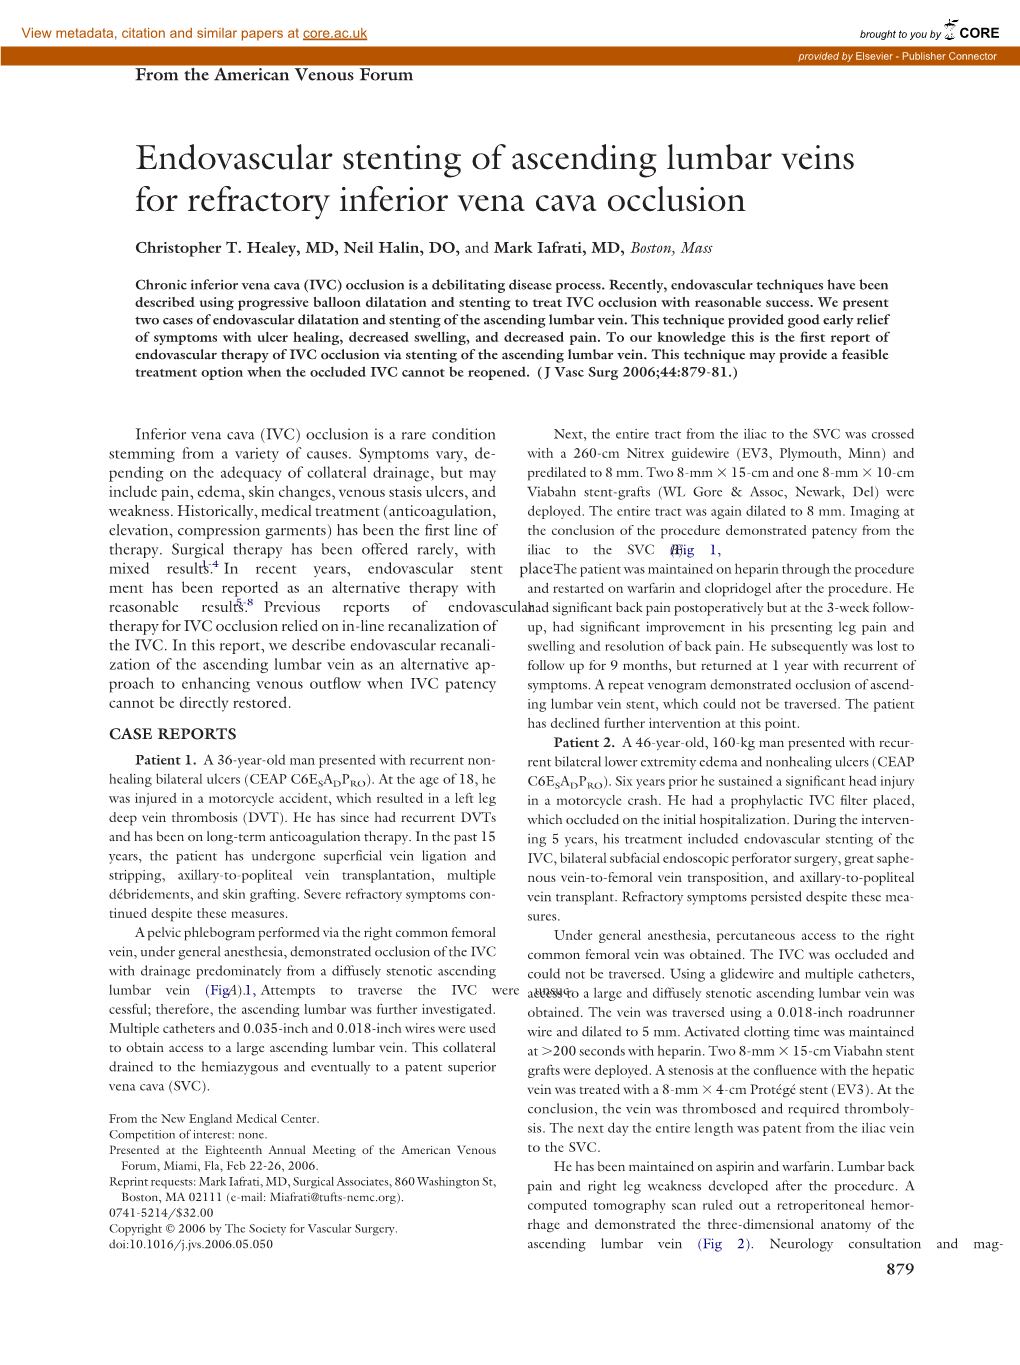 Endovascular Stenting of Ascending Lumbar Veins for Refractory Inferior Vena Cava Occlusion